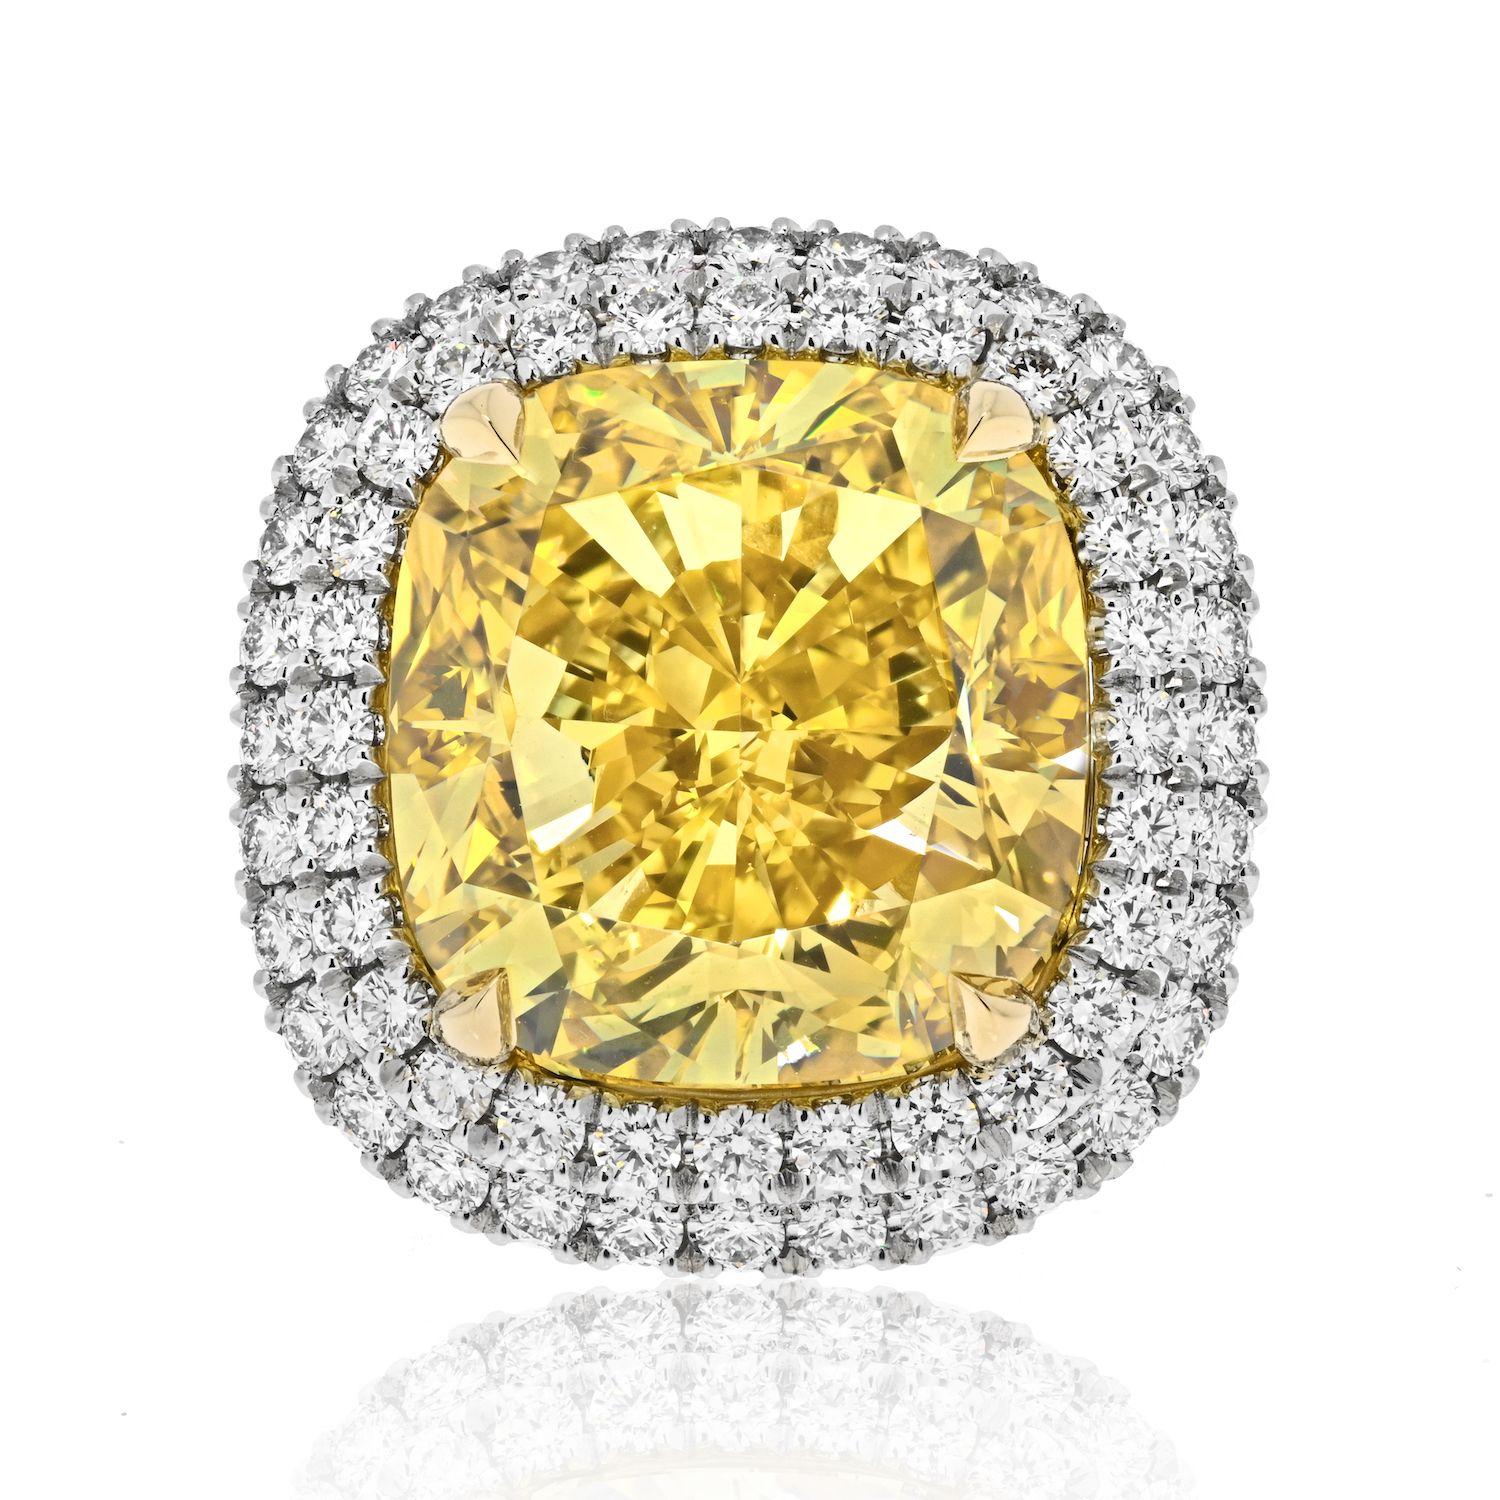 This important 21 carats fancy deep brownish yellow VVS1 clarity Cushion Cut diamond set in handmade pave 1.50cttw platinum and 18k yellow gold diamond mounting. This ring may be sized or re-designed in a different mounting to suit the client's